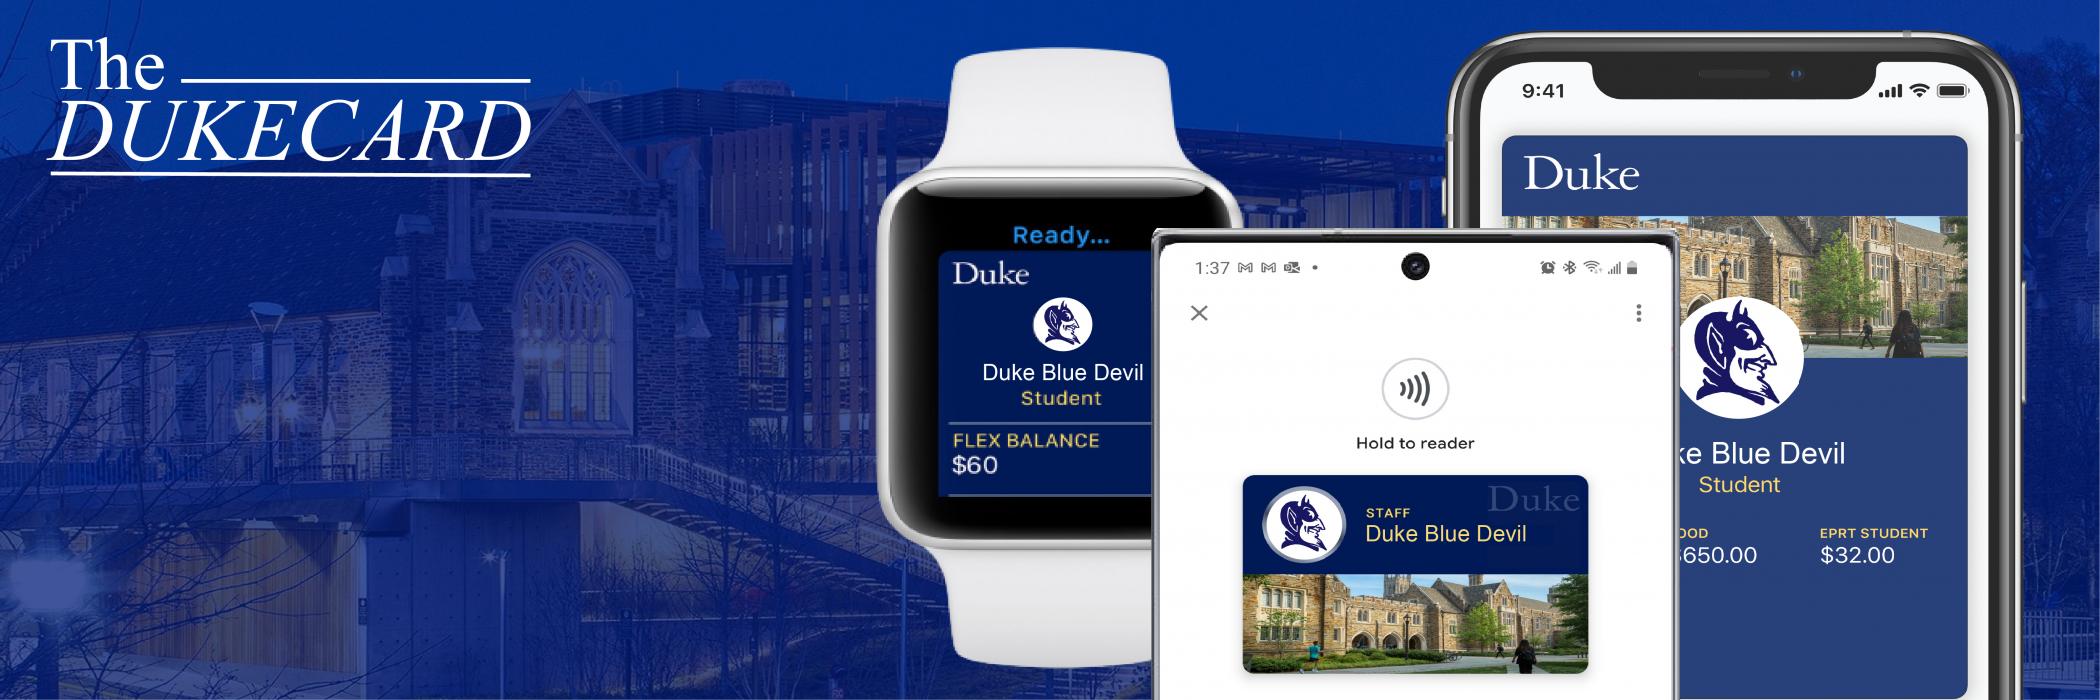 Banner image featuring a smart watch, a smartphone, and a web browser all displaying Mobile DukeCards